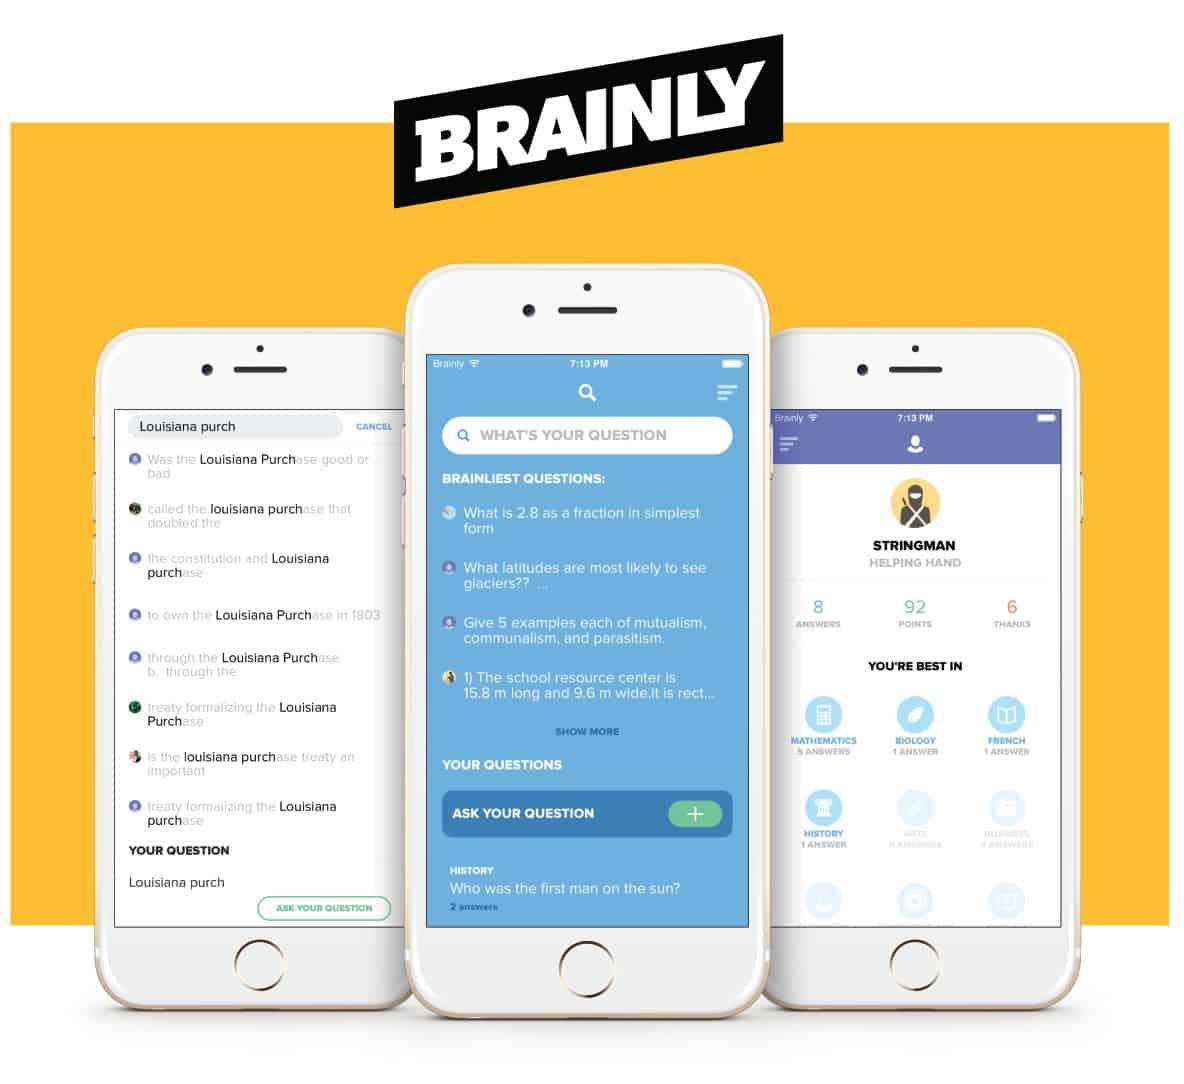 Screenshots of the iOS app UI design of Brainly, a collaborative learning platform for students.